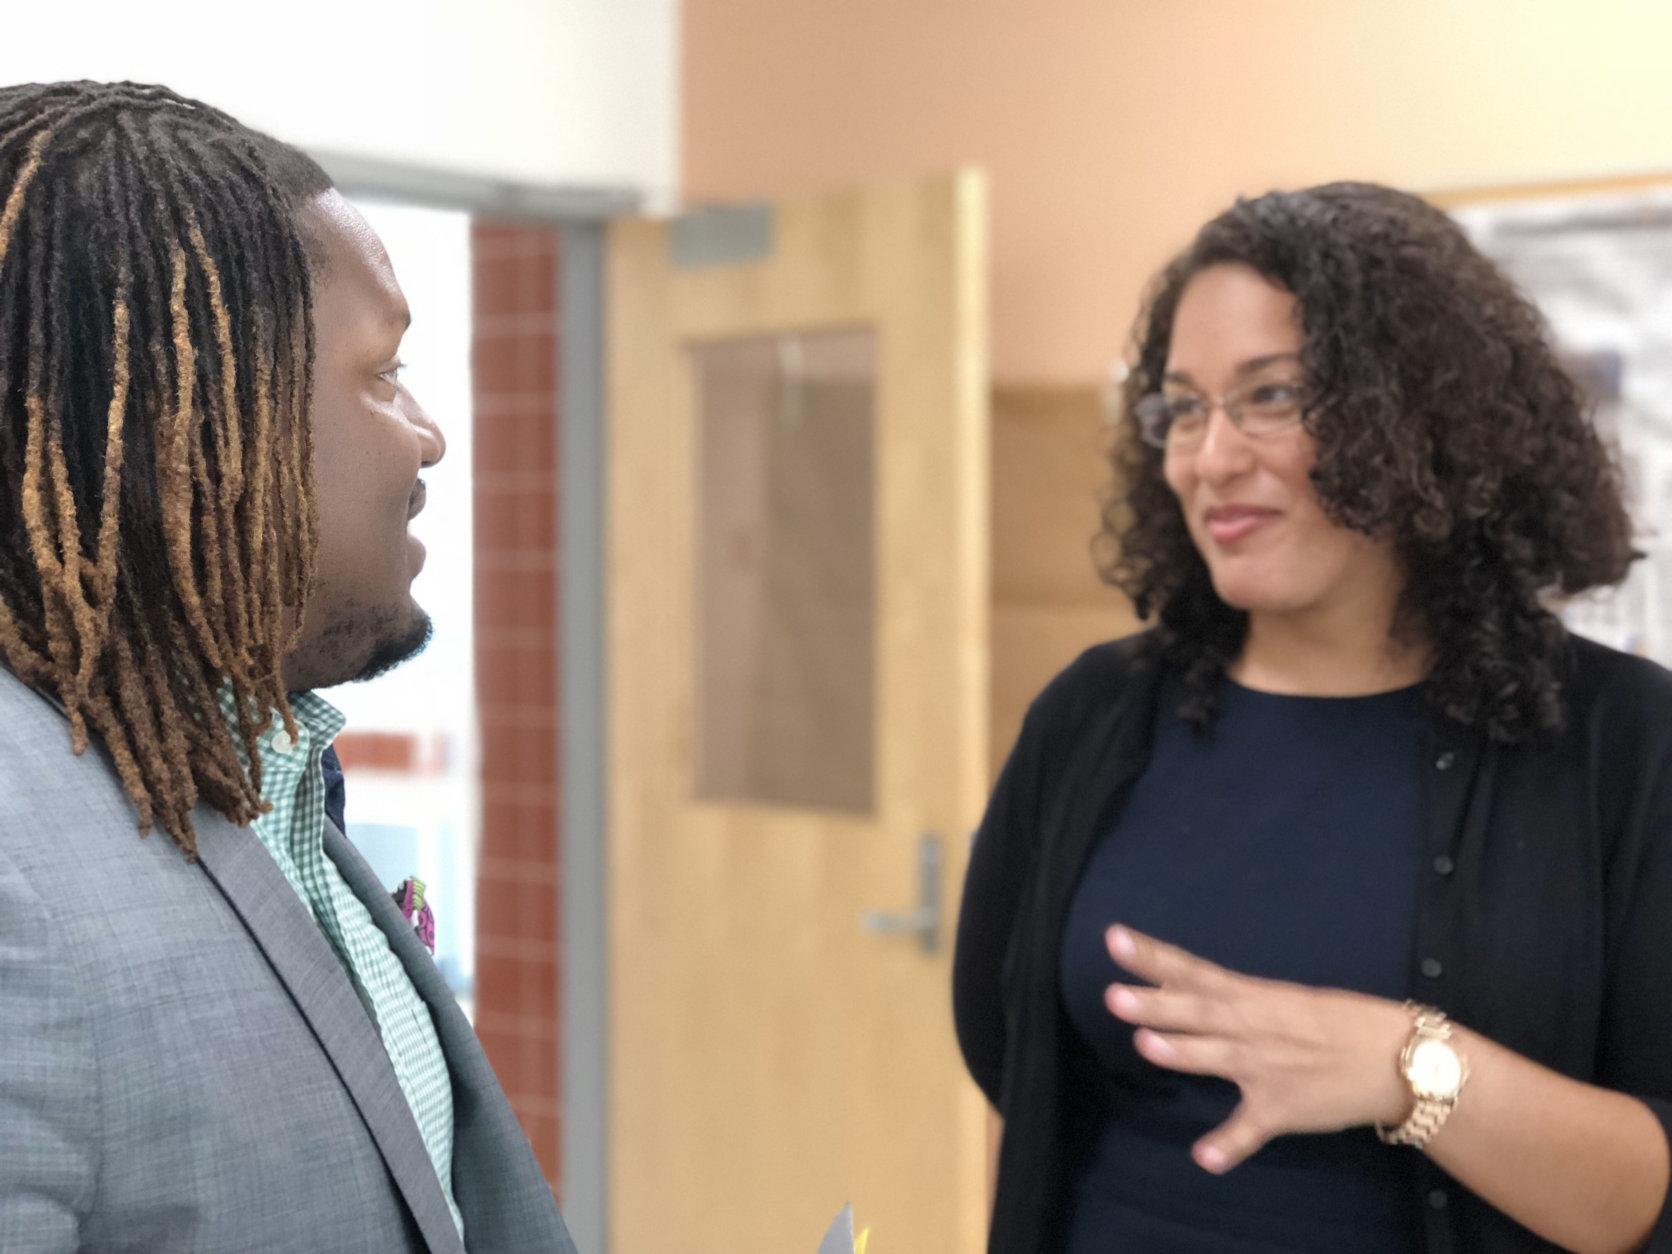 Marqwan Jermaine Sirls will teach English at Bowie High School. He chats with Mary Perez who will be teaching Spanish at Benjamin Tasker Middle School. (WTOP/Kate Ryan)